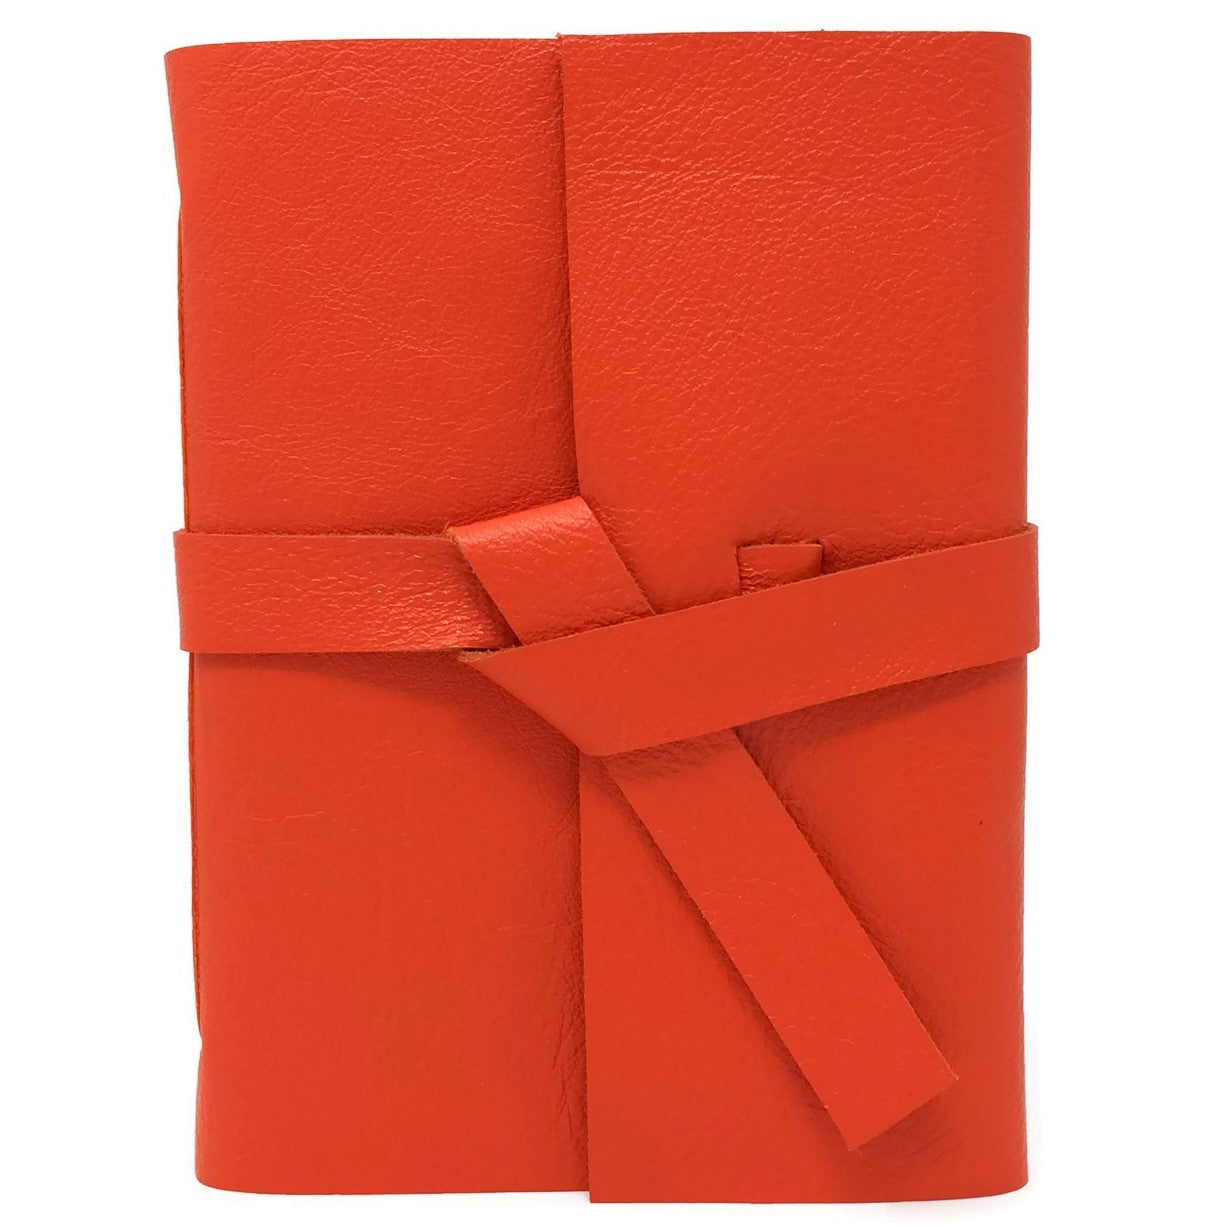 Front view of Orange Leather Journal